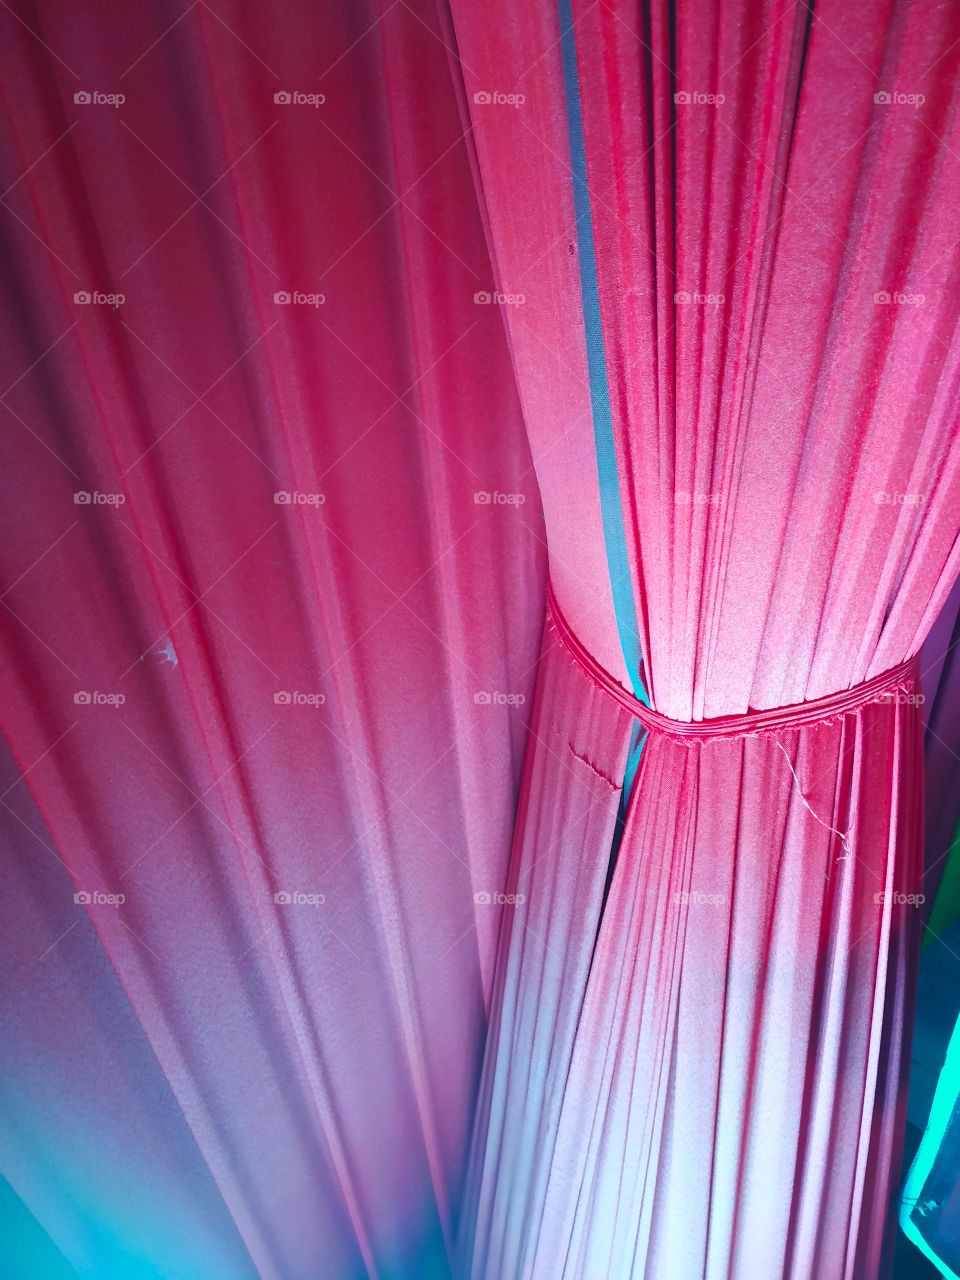 wedding backdrop Party background cloth Curtain Celebration Stage cloth Performance Background Satin Drape Wall